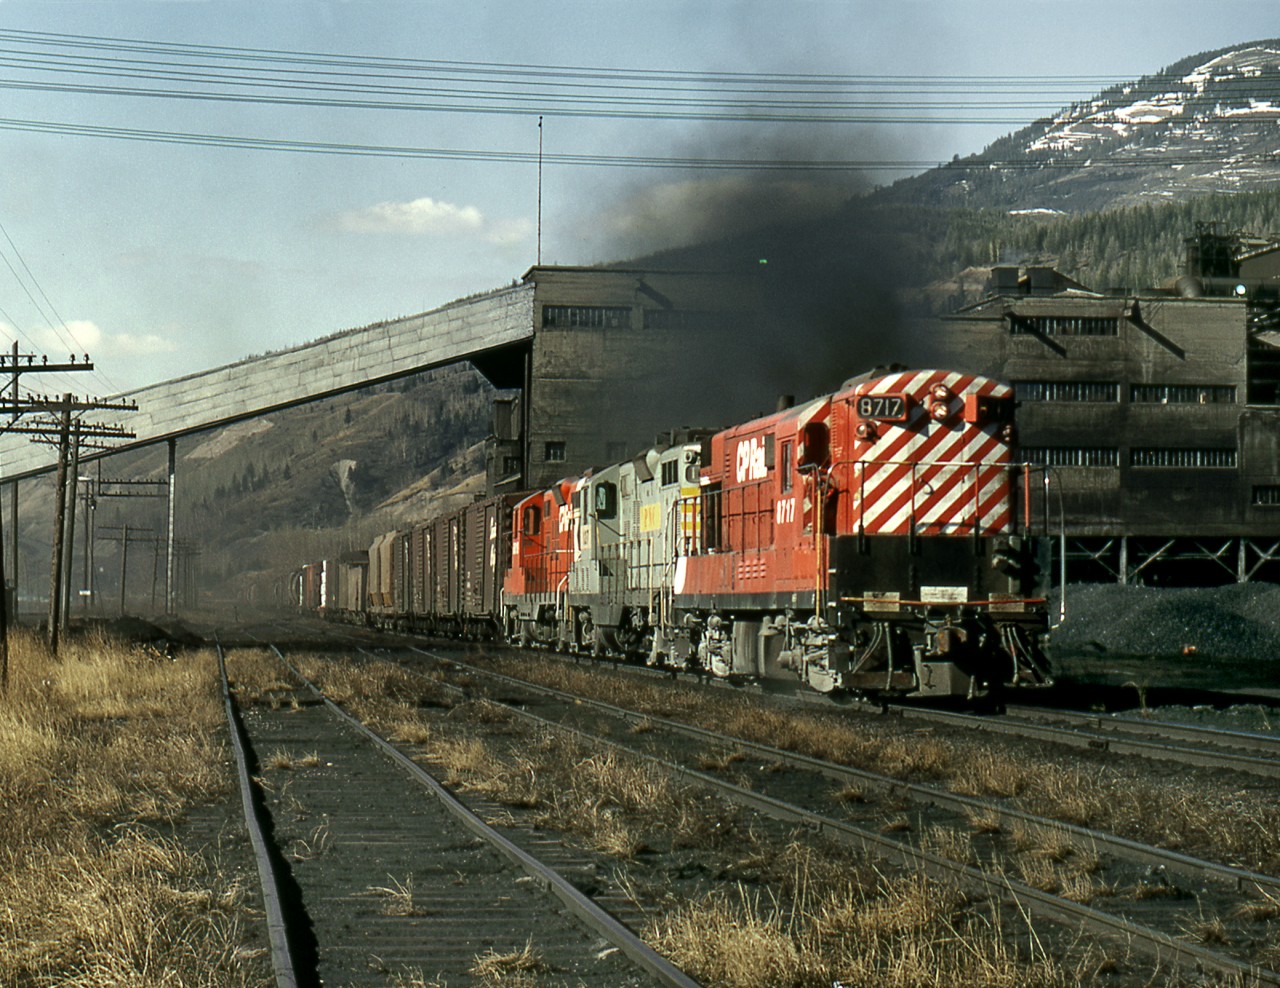 The eastbound Trail freight passes the Crowsnest Pass Coal Company's tipple and coking ovens at the base of the Crownest pass.